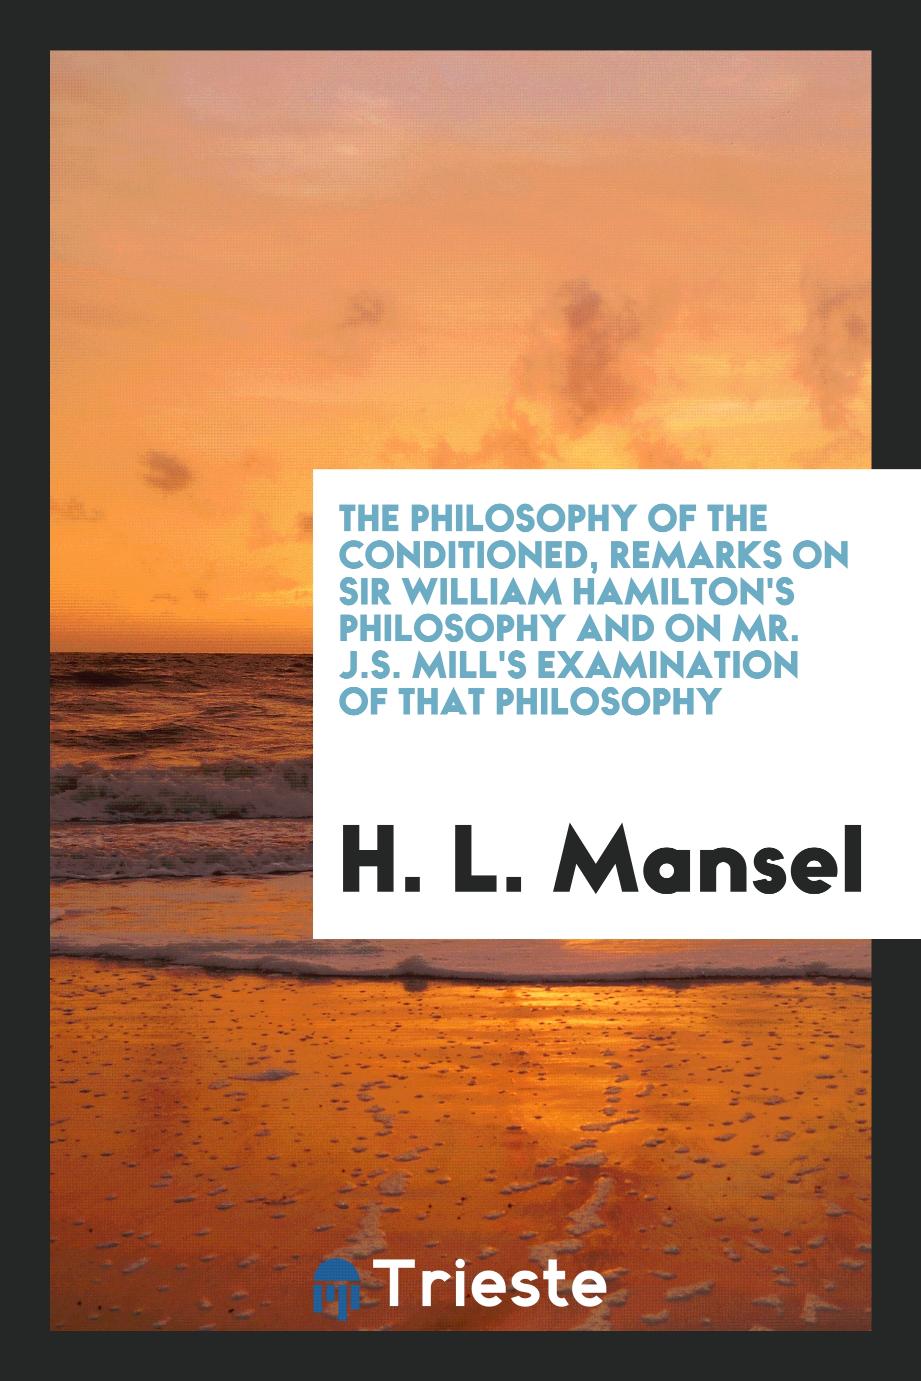 The Philosophy of the Conditioned, Remarks on Sir William Hamilton's Philosophy and on Mr. J.S. Mill's Examination of That Philosophy